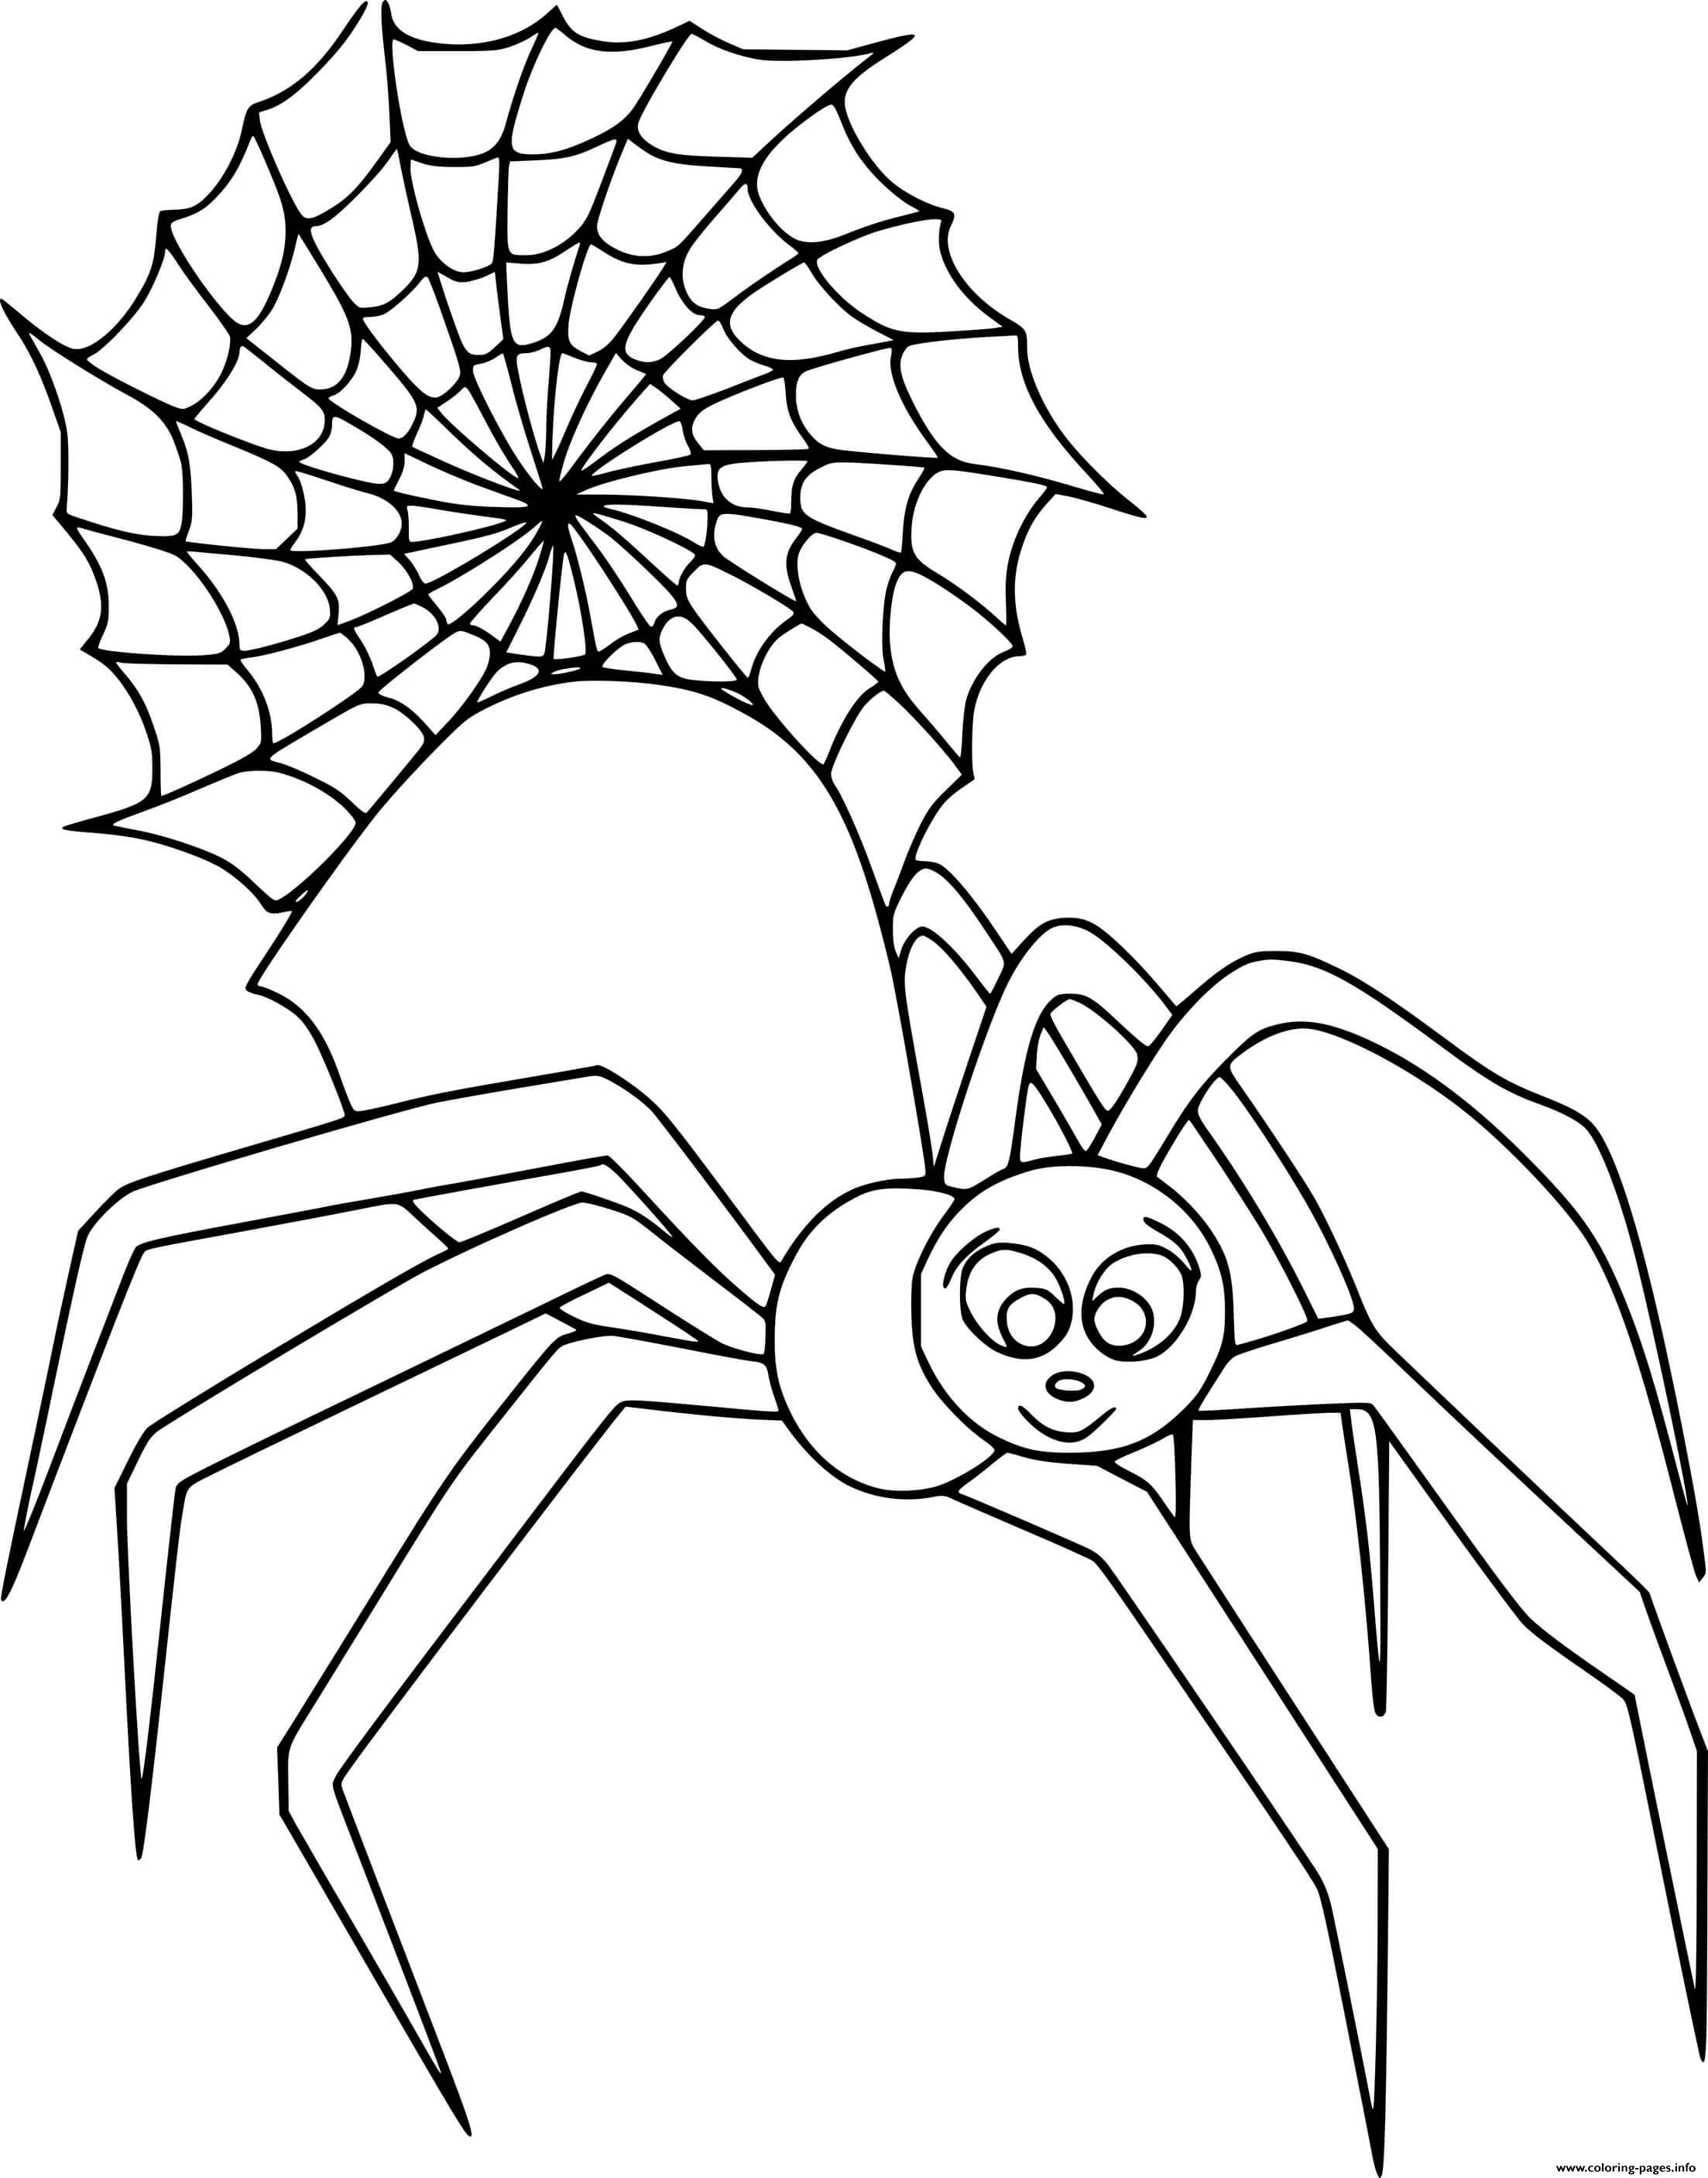 Cute Big Spider And Web coloring